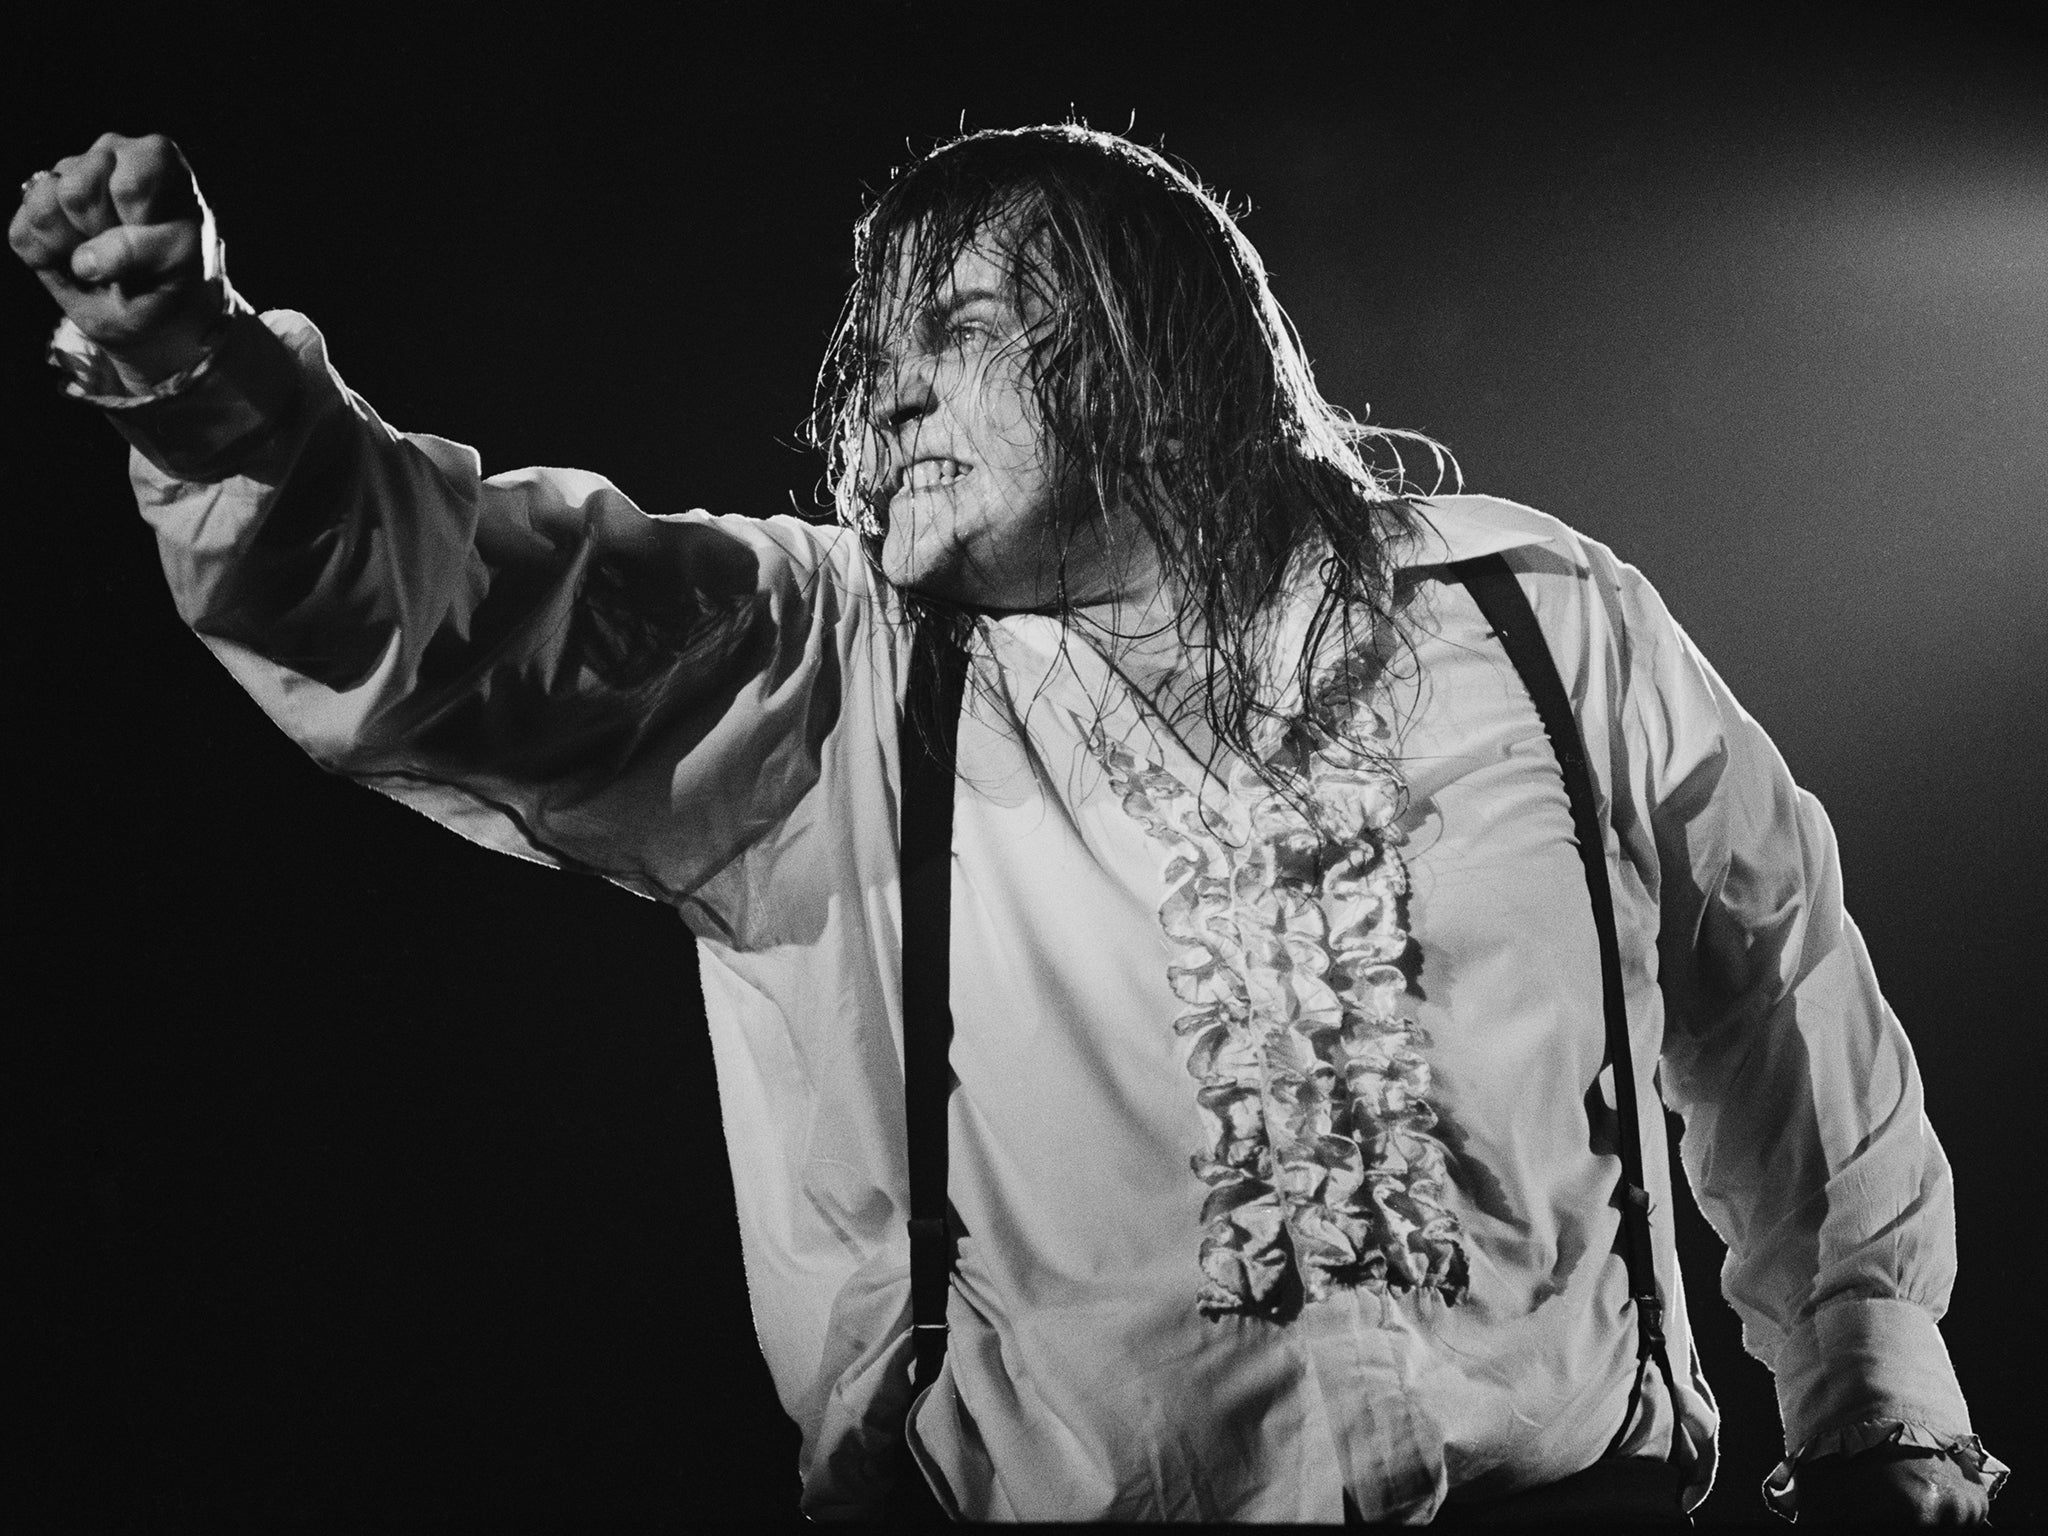 Giving his all during the Bat Out Of Hell Tour, USA, September 1978